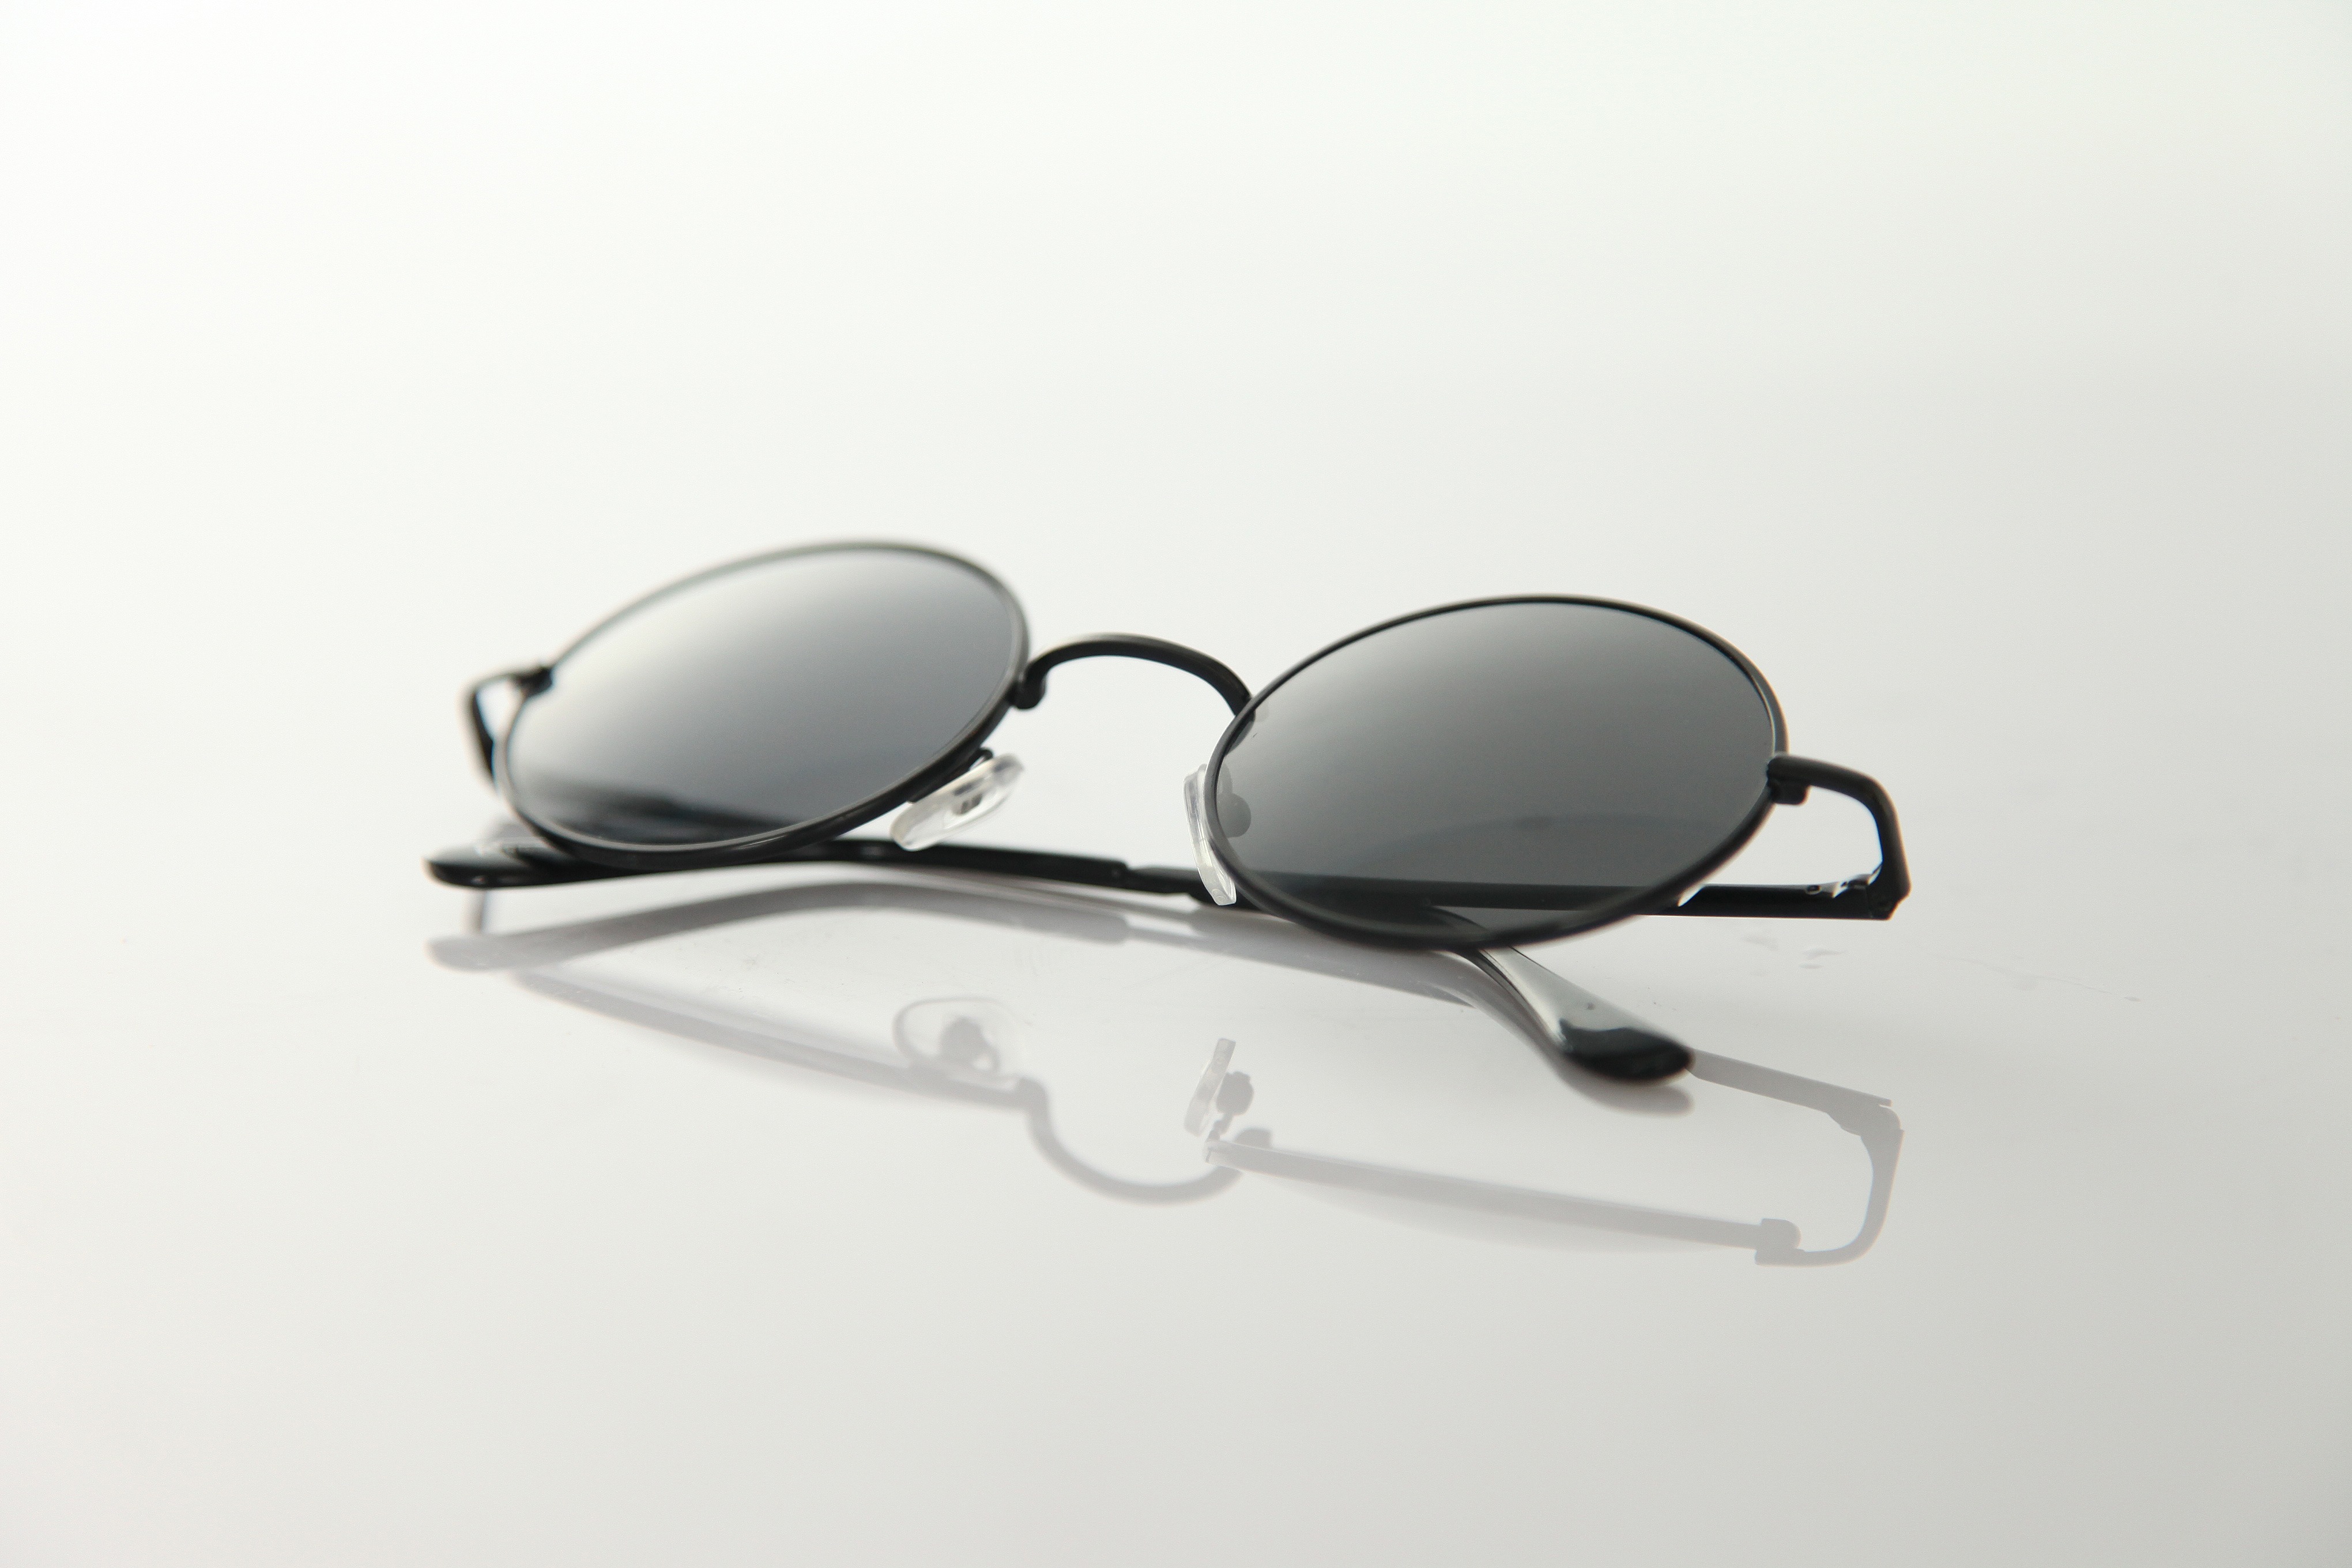 Free photo Sunglasses with round lenses on gray background